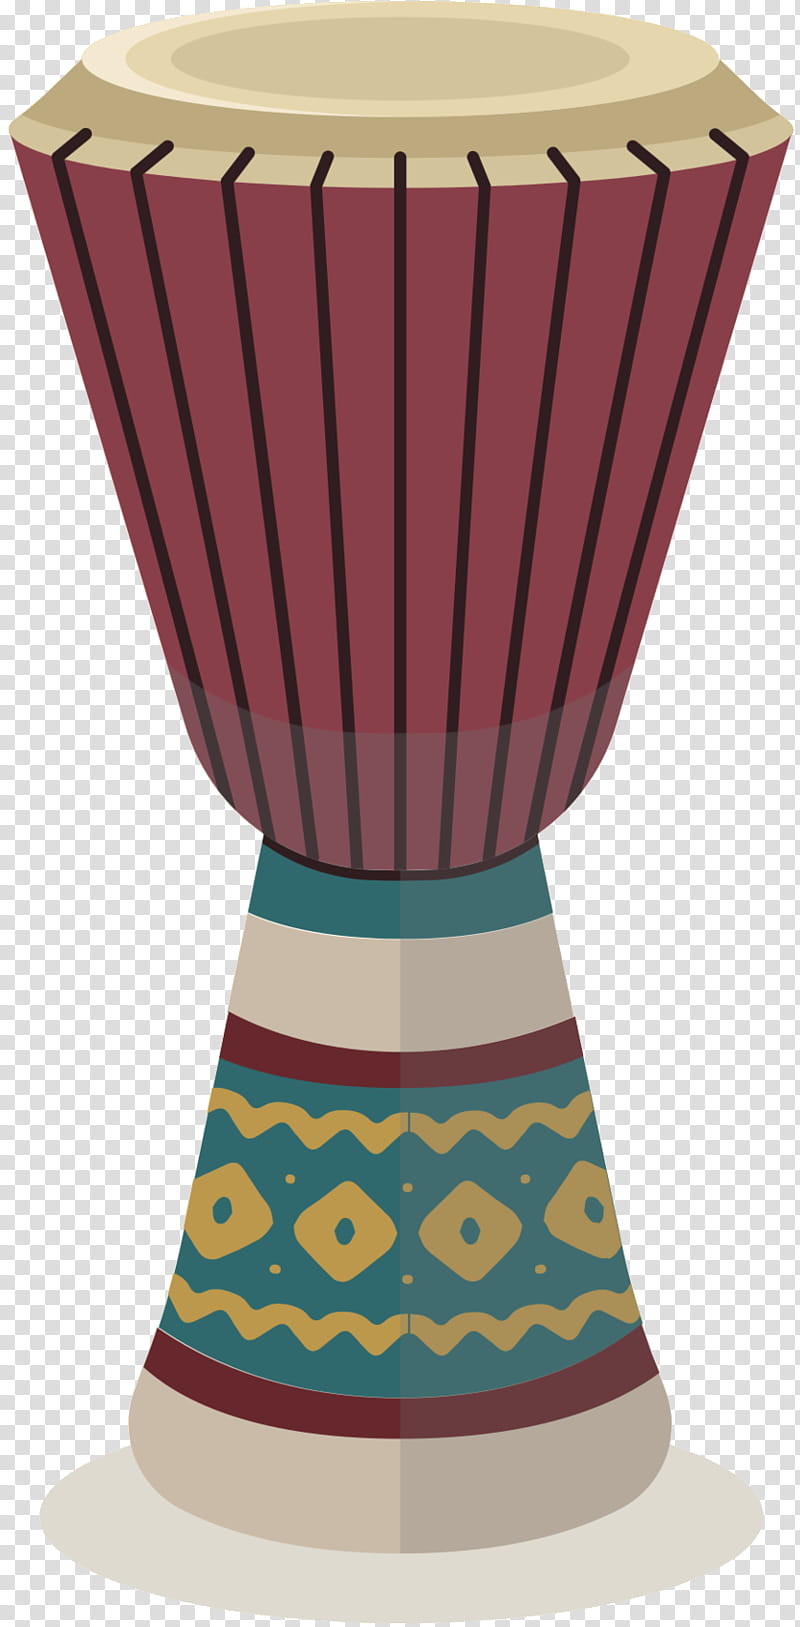 Djembe Djembe, Drum, Hand Drums, Turquoise, Musical Instrument, Membranophone, Goblet Drum, Magenta transparent background PNG clipart